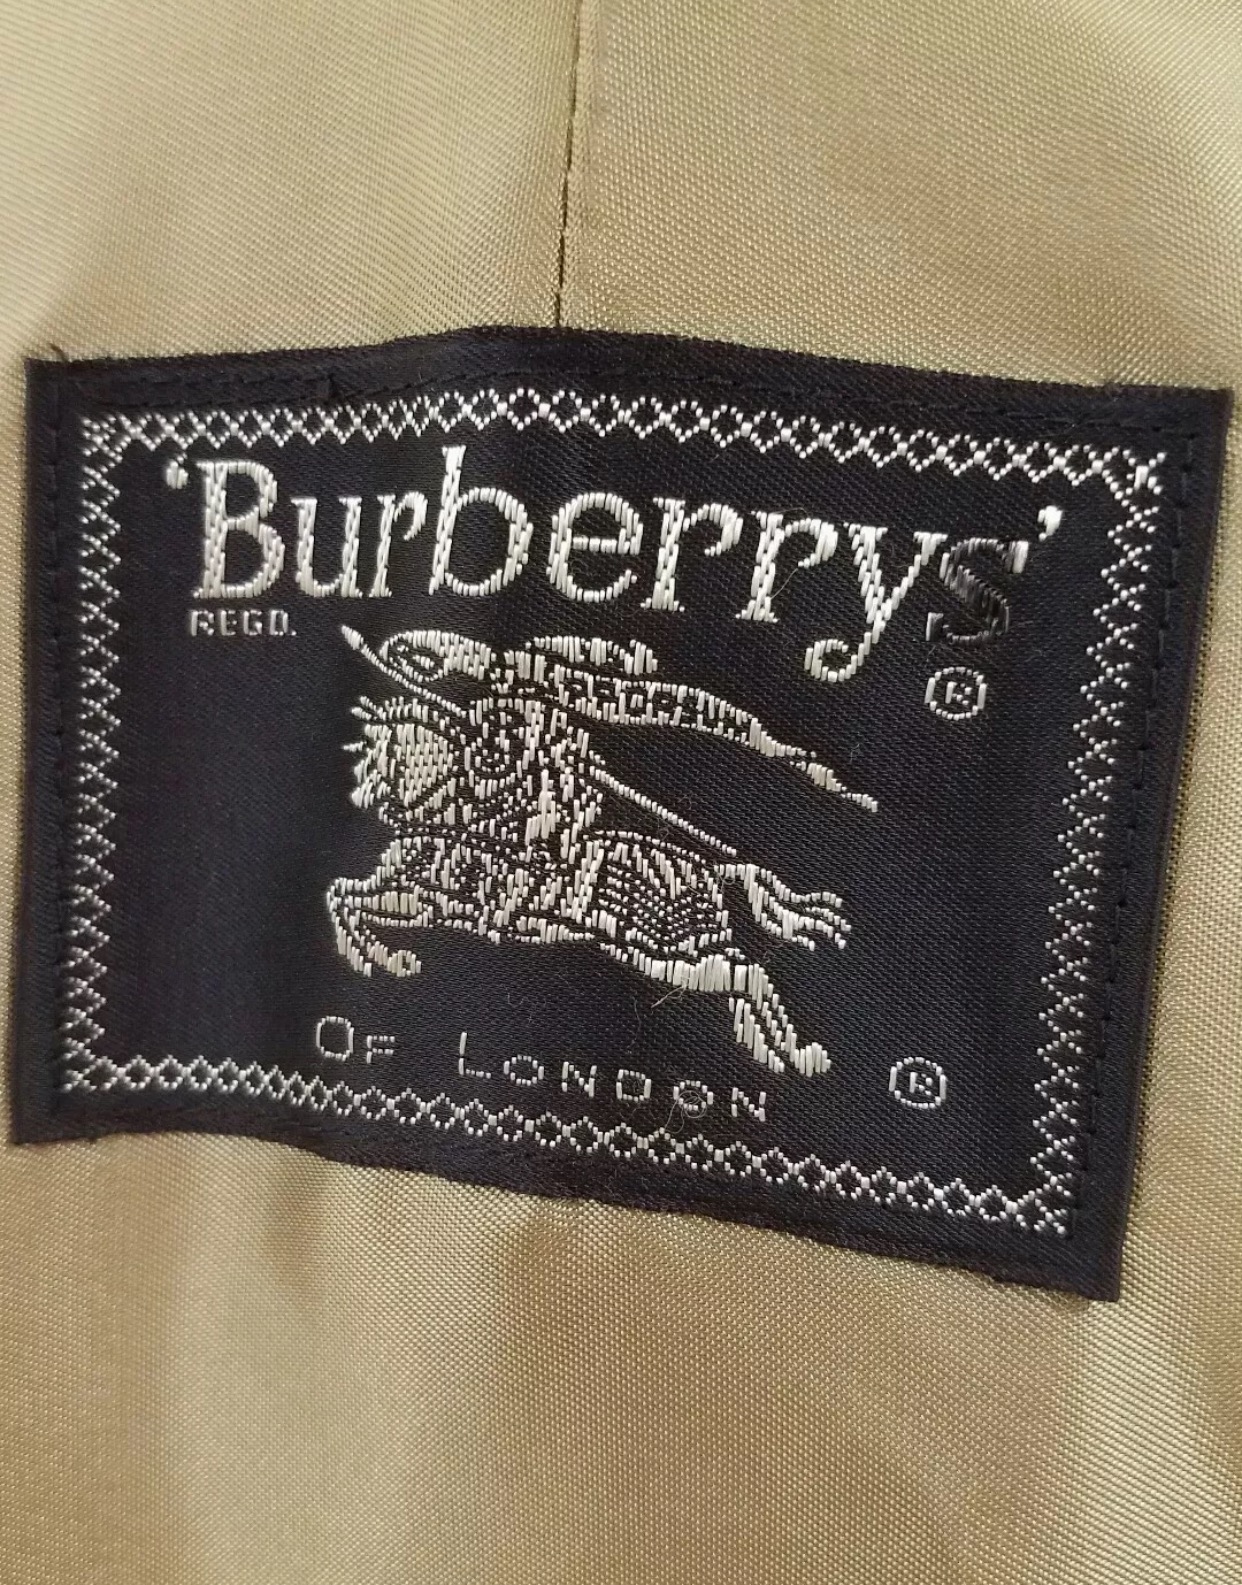 the real real burberry trench